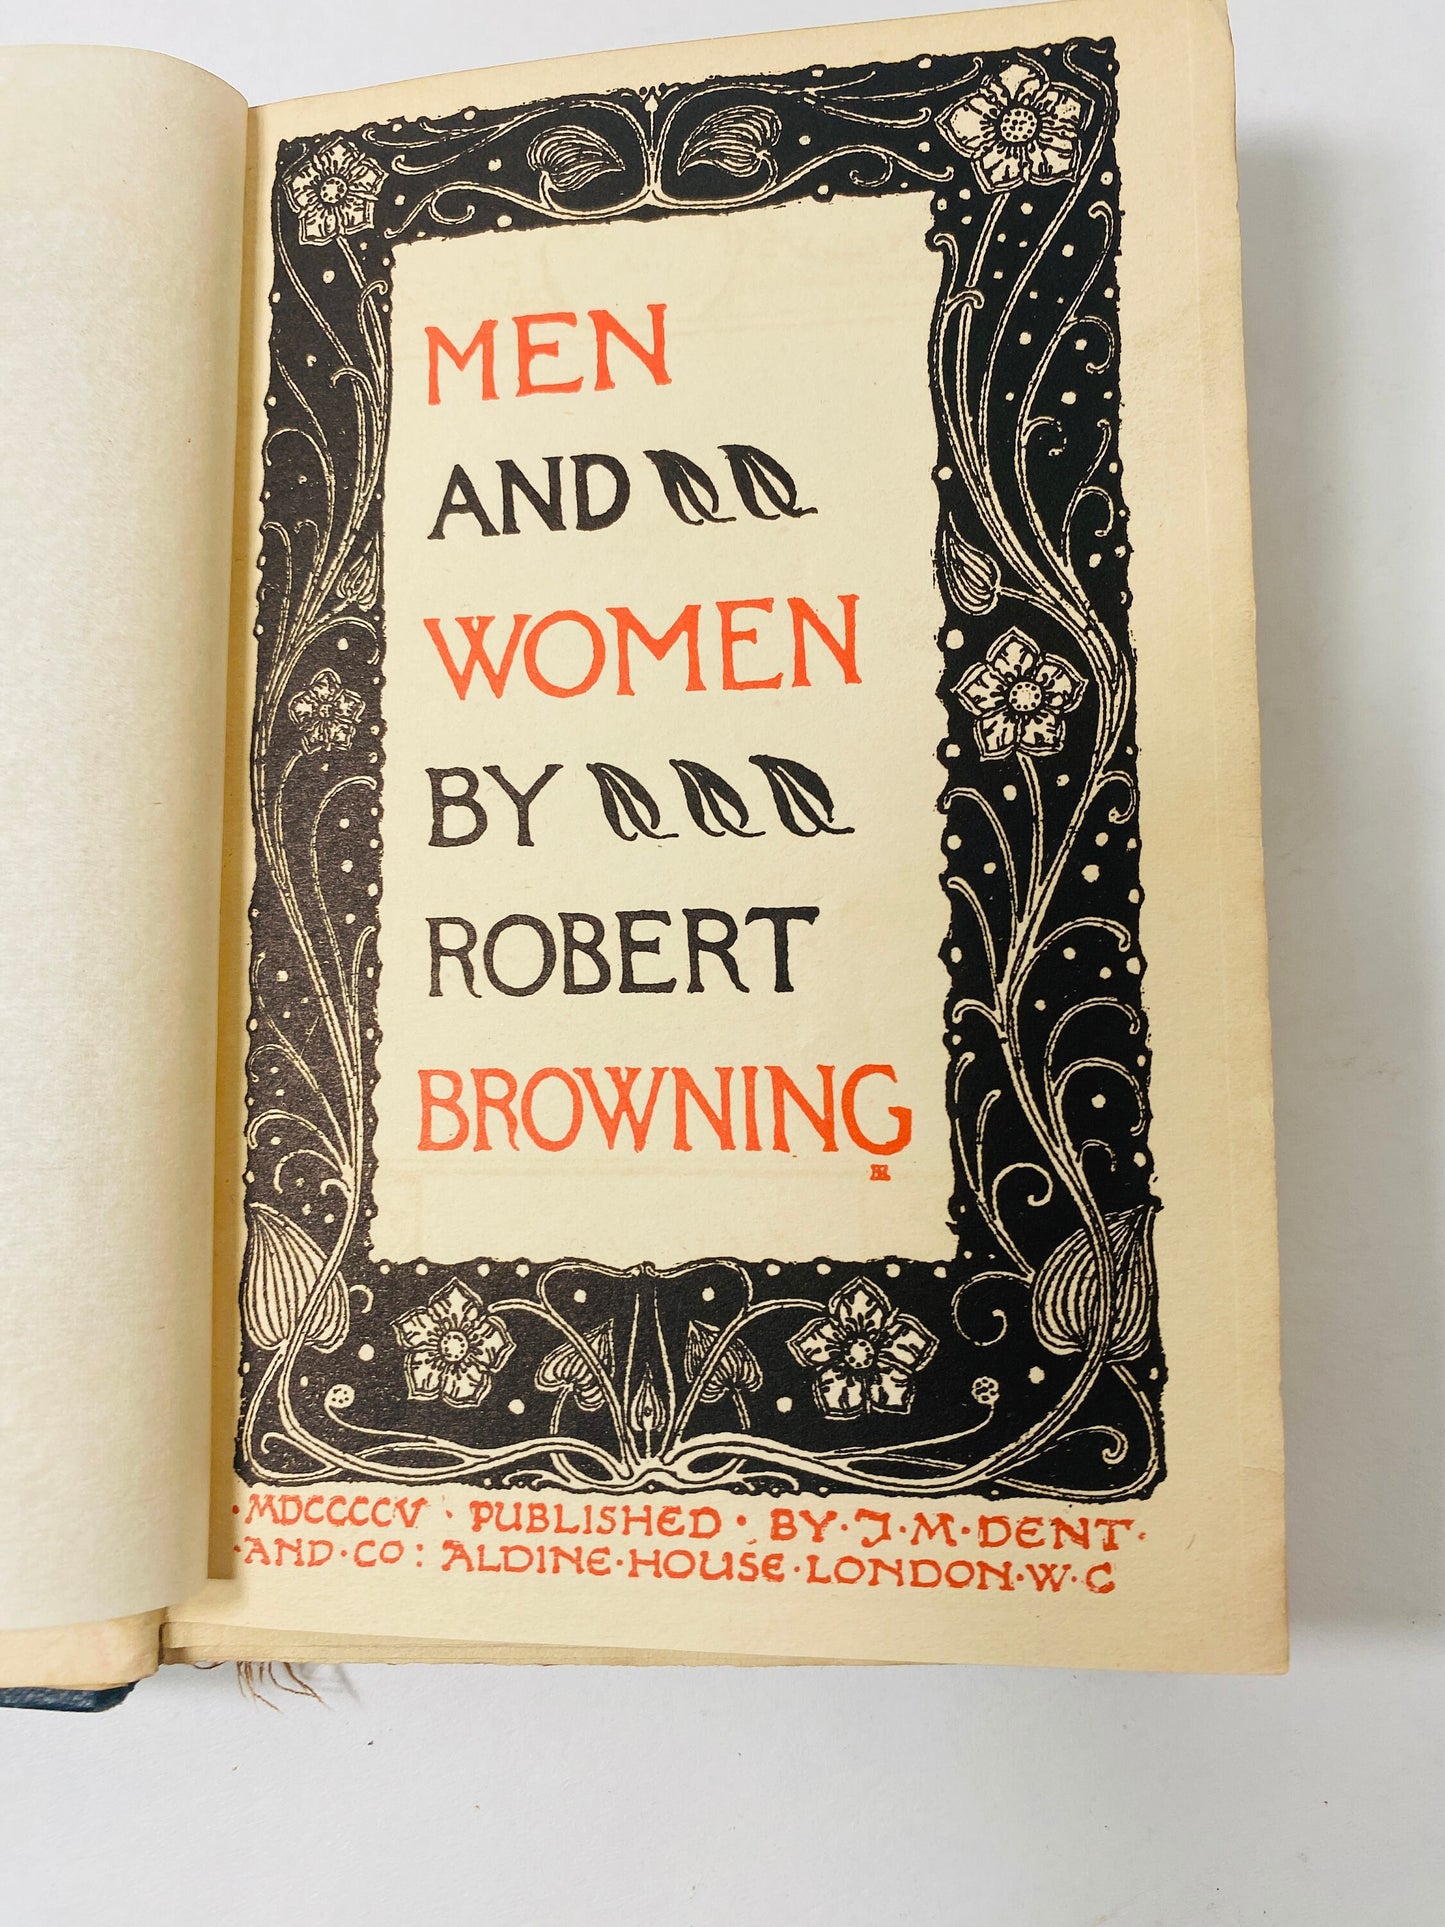 Men & Women antique poetry by Robert Browning book GORGEOUS vintage book circa 1905 Dedicated to Alfred Tennyson. Poetry gift.